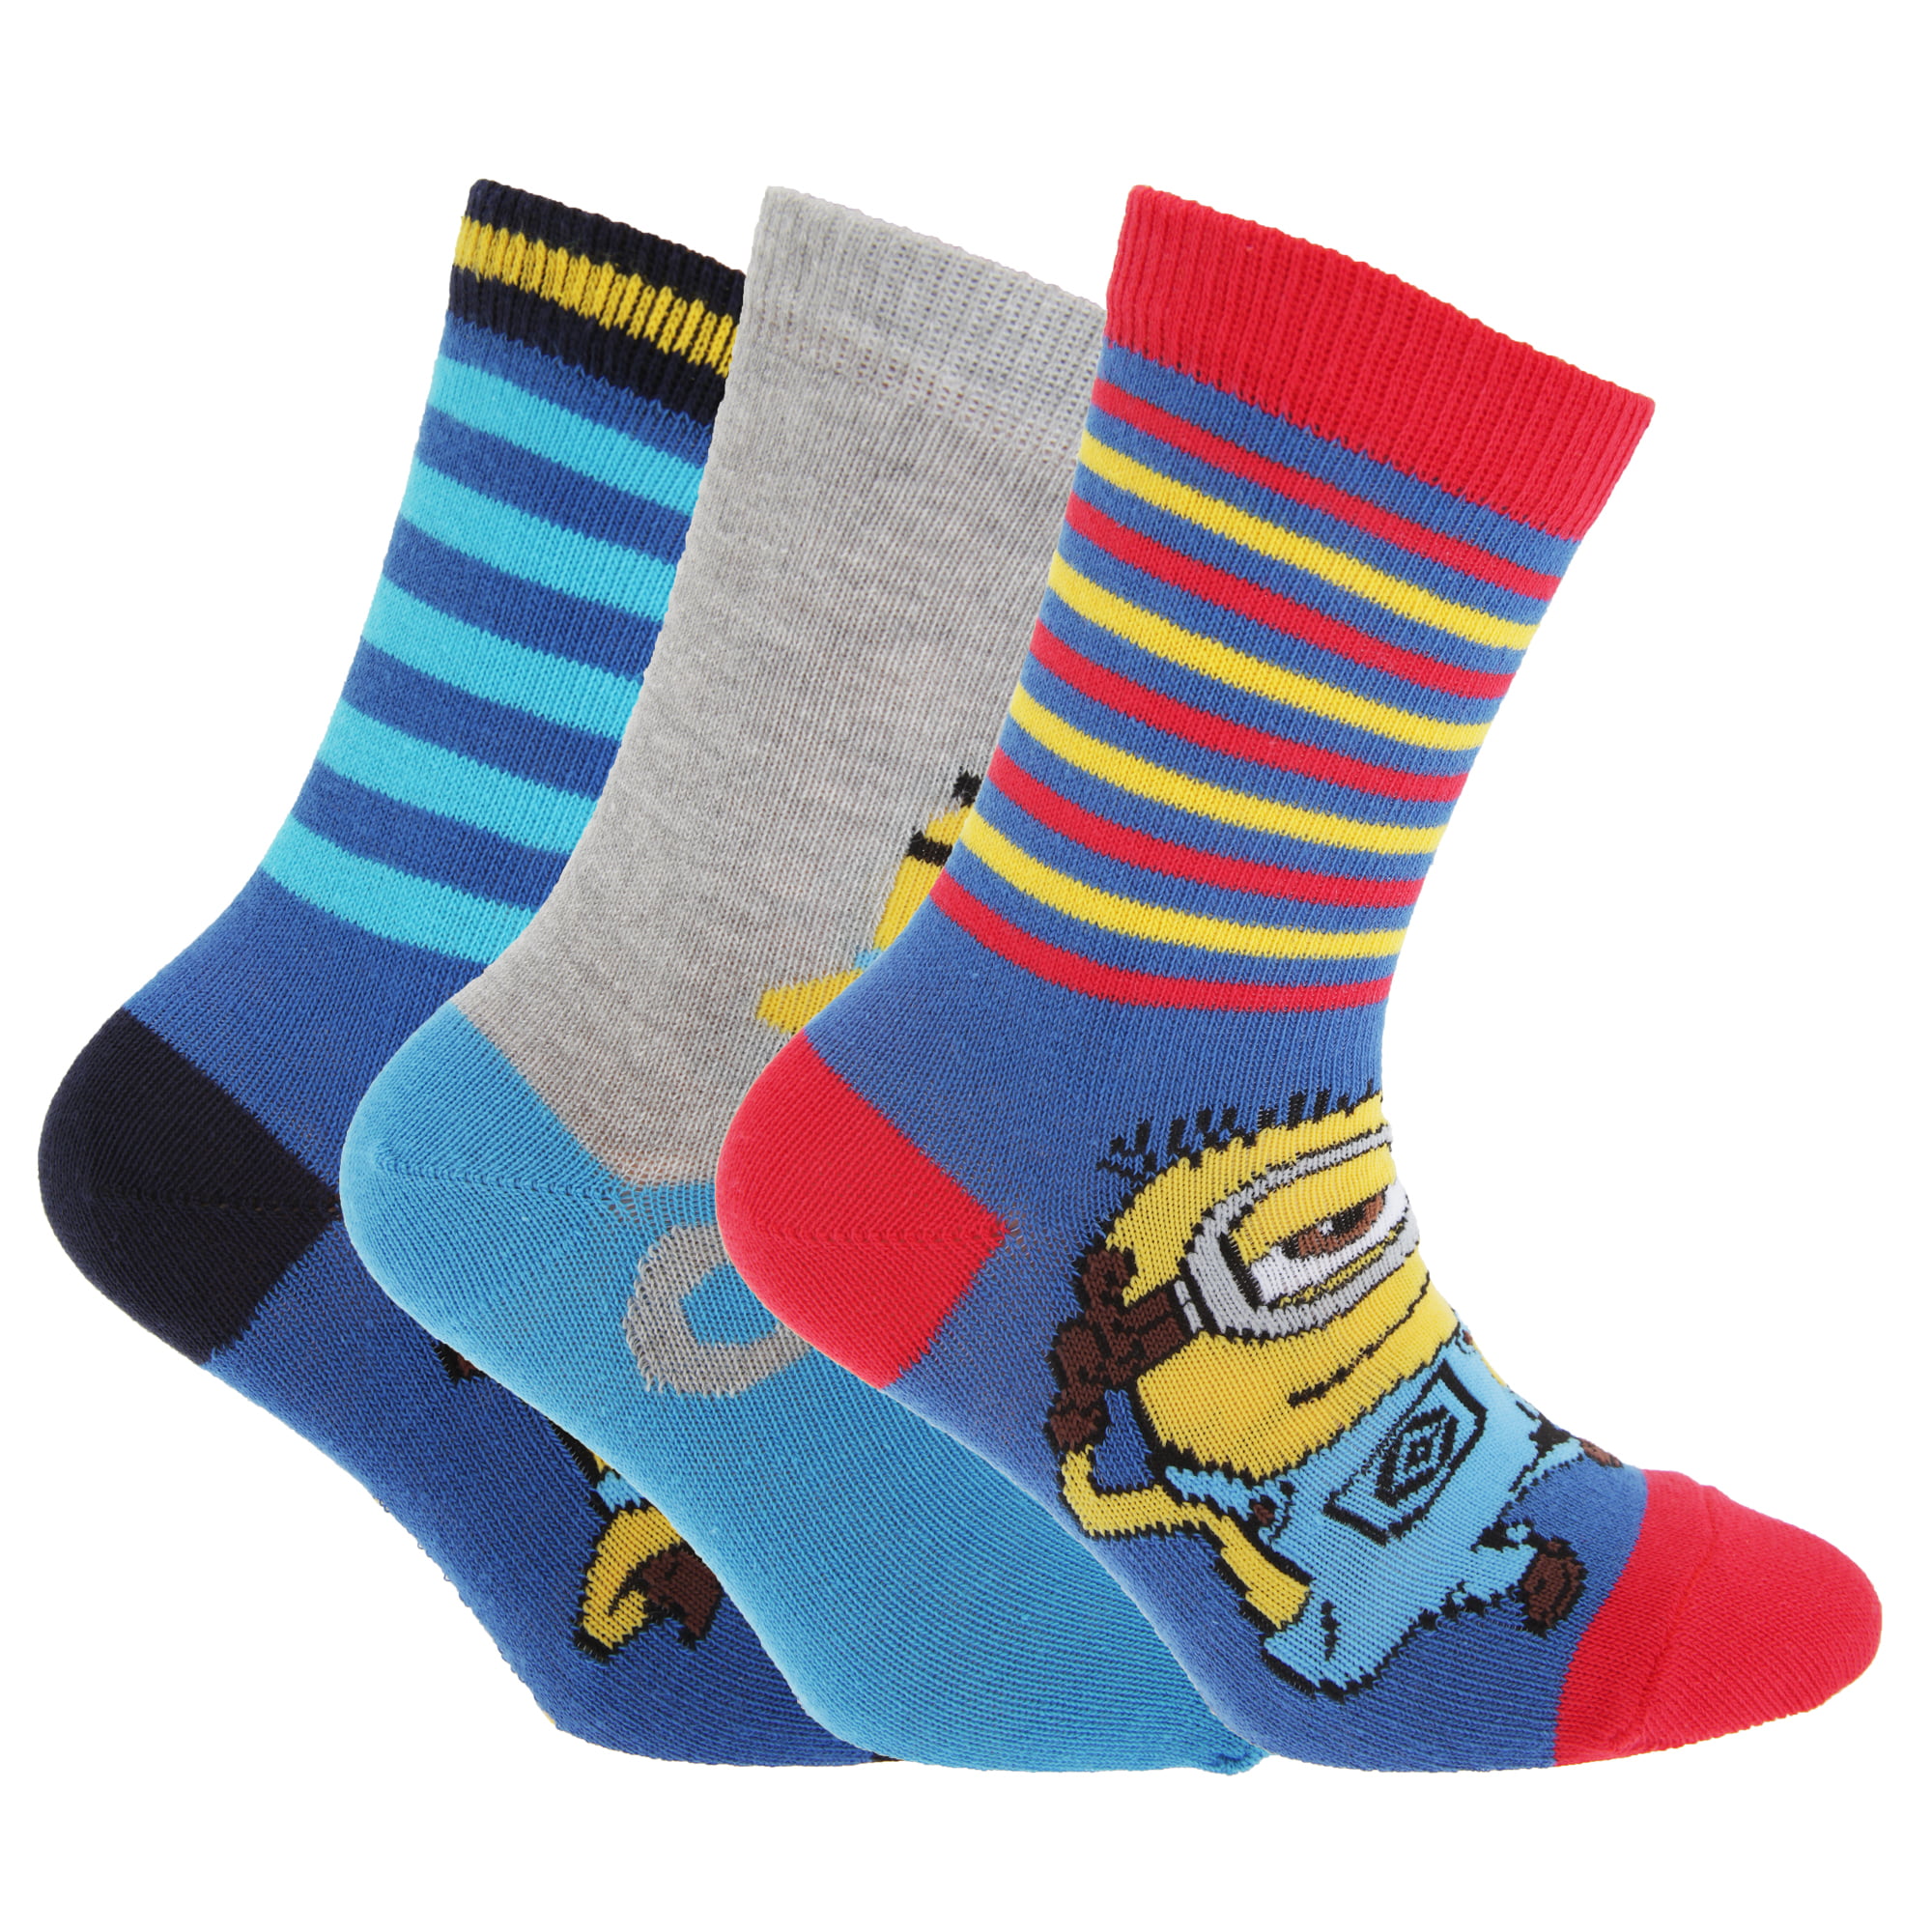 Official 3PK Minions Design Socks for Boys & Girls Despicable Me Childrens Kids 